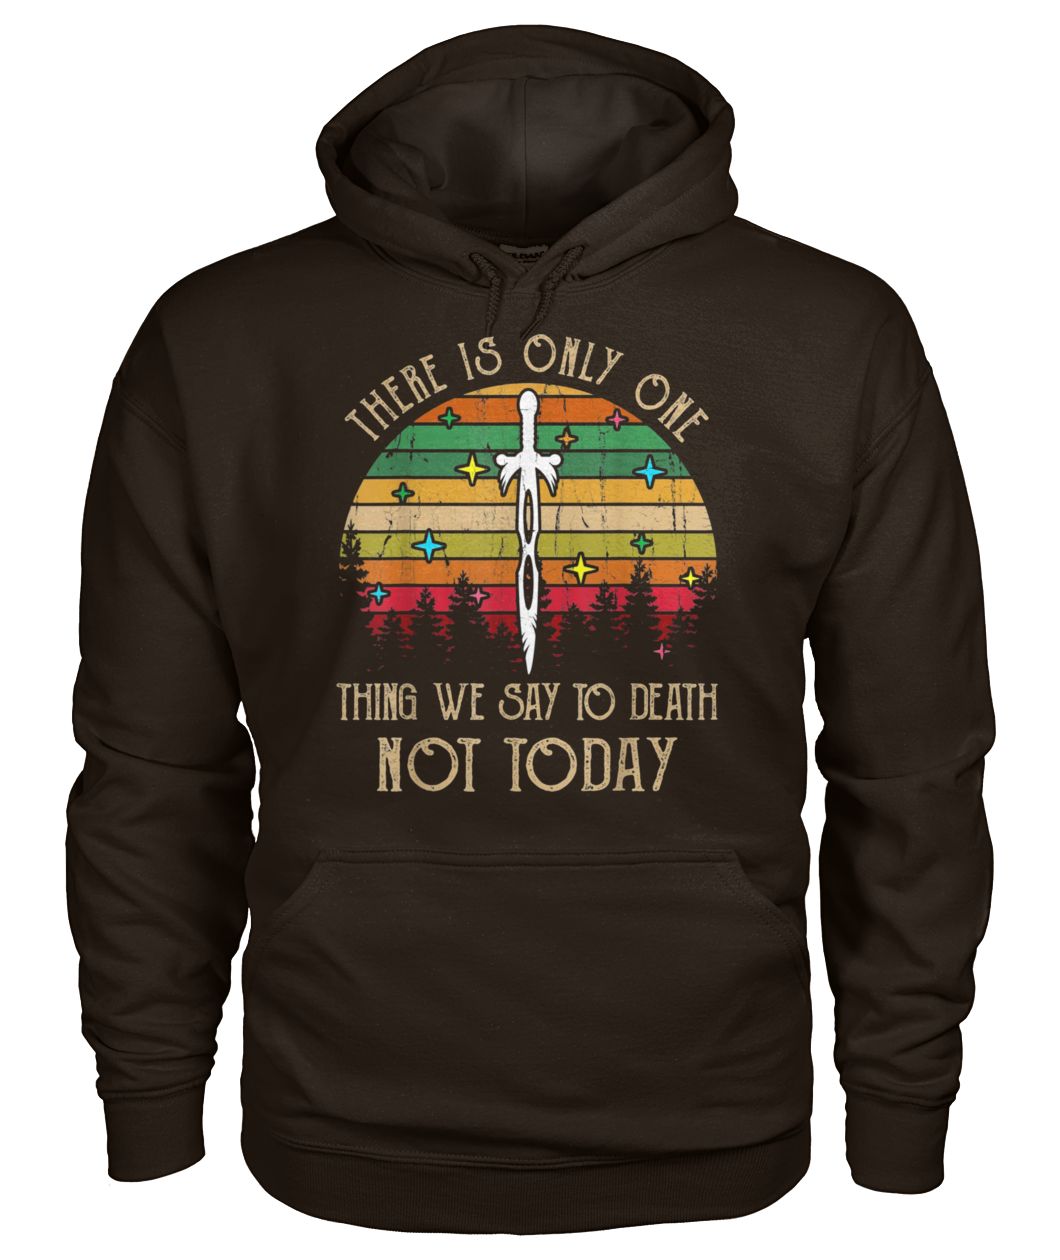 Game of thrones there is only one thing we say to death not today gildan hoodie